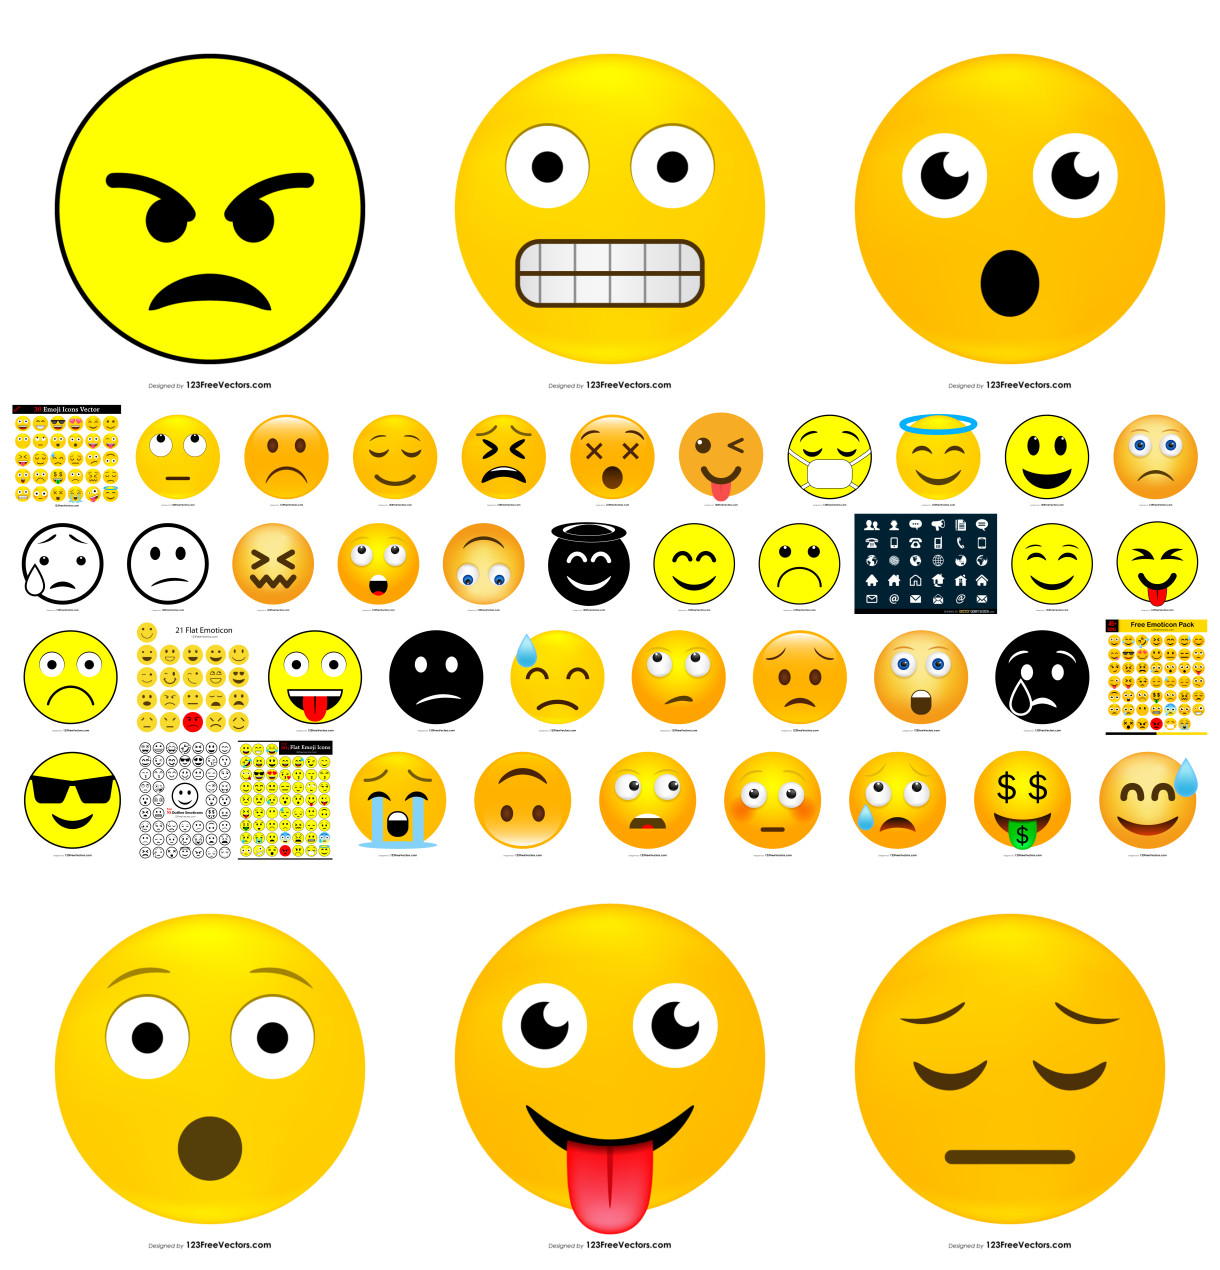 Emotional Faces: A Sweeping Collection of Vector Emoji Icons